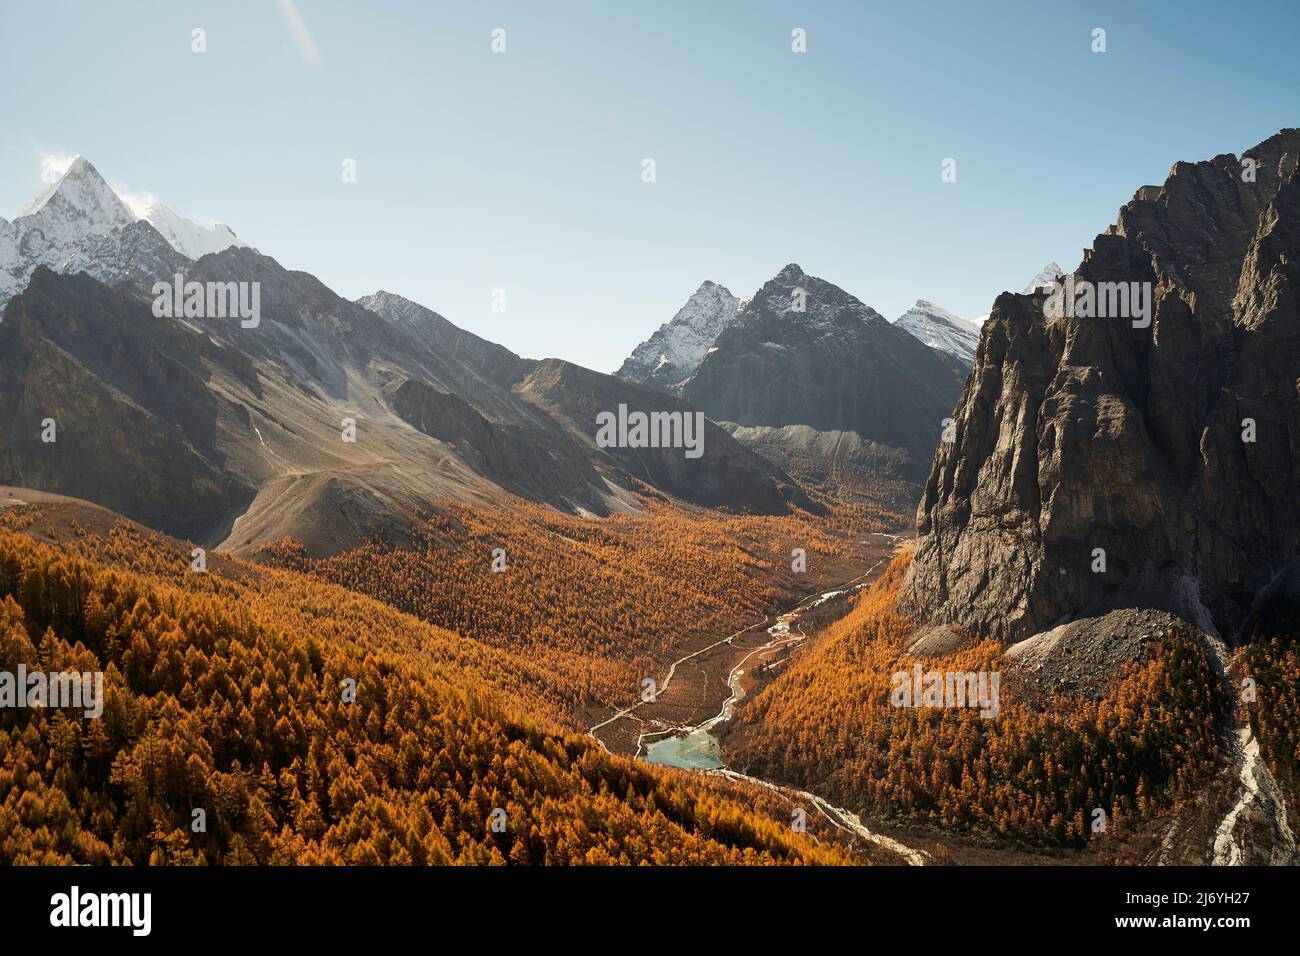 a river valley with autumn foliage running through the mountains in yading national park, daocheng county, sichuan province, china Stock Photo